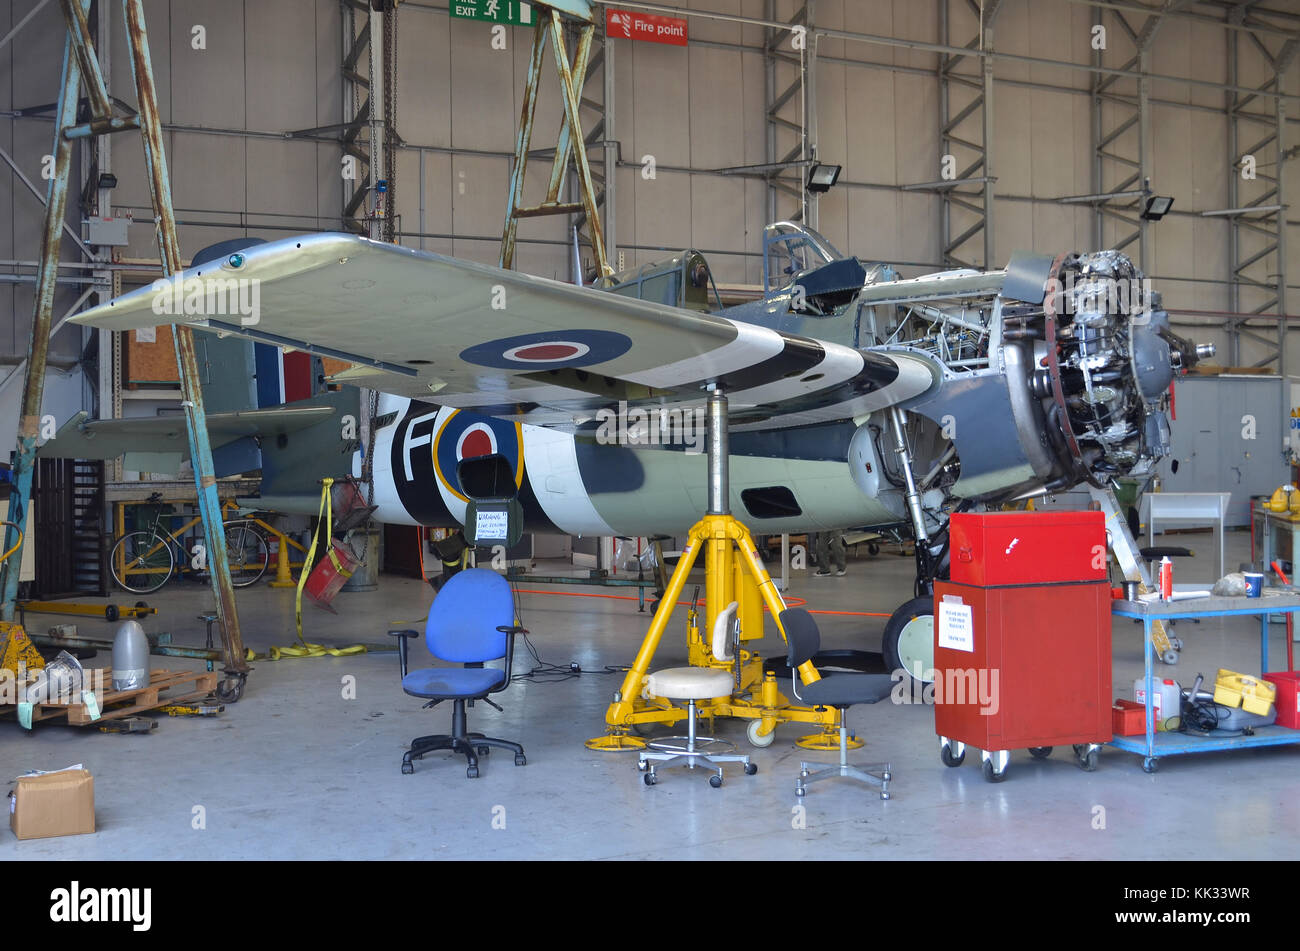 Grumman Wildcat FM2, built by General Motors, in Royal Navy Fleet Air Arm markings, undergoing maintenance by The Fighter Collection, Duxford, UK. Stock Photo